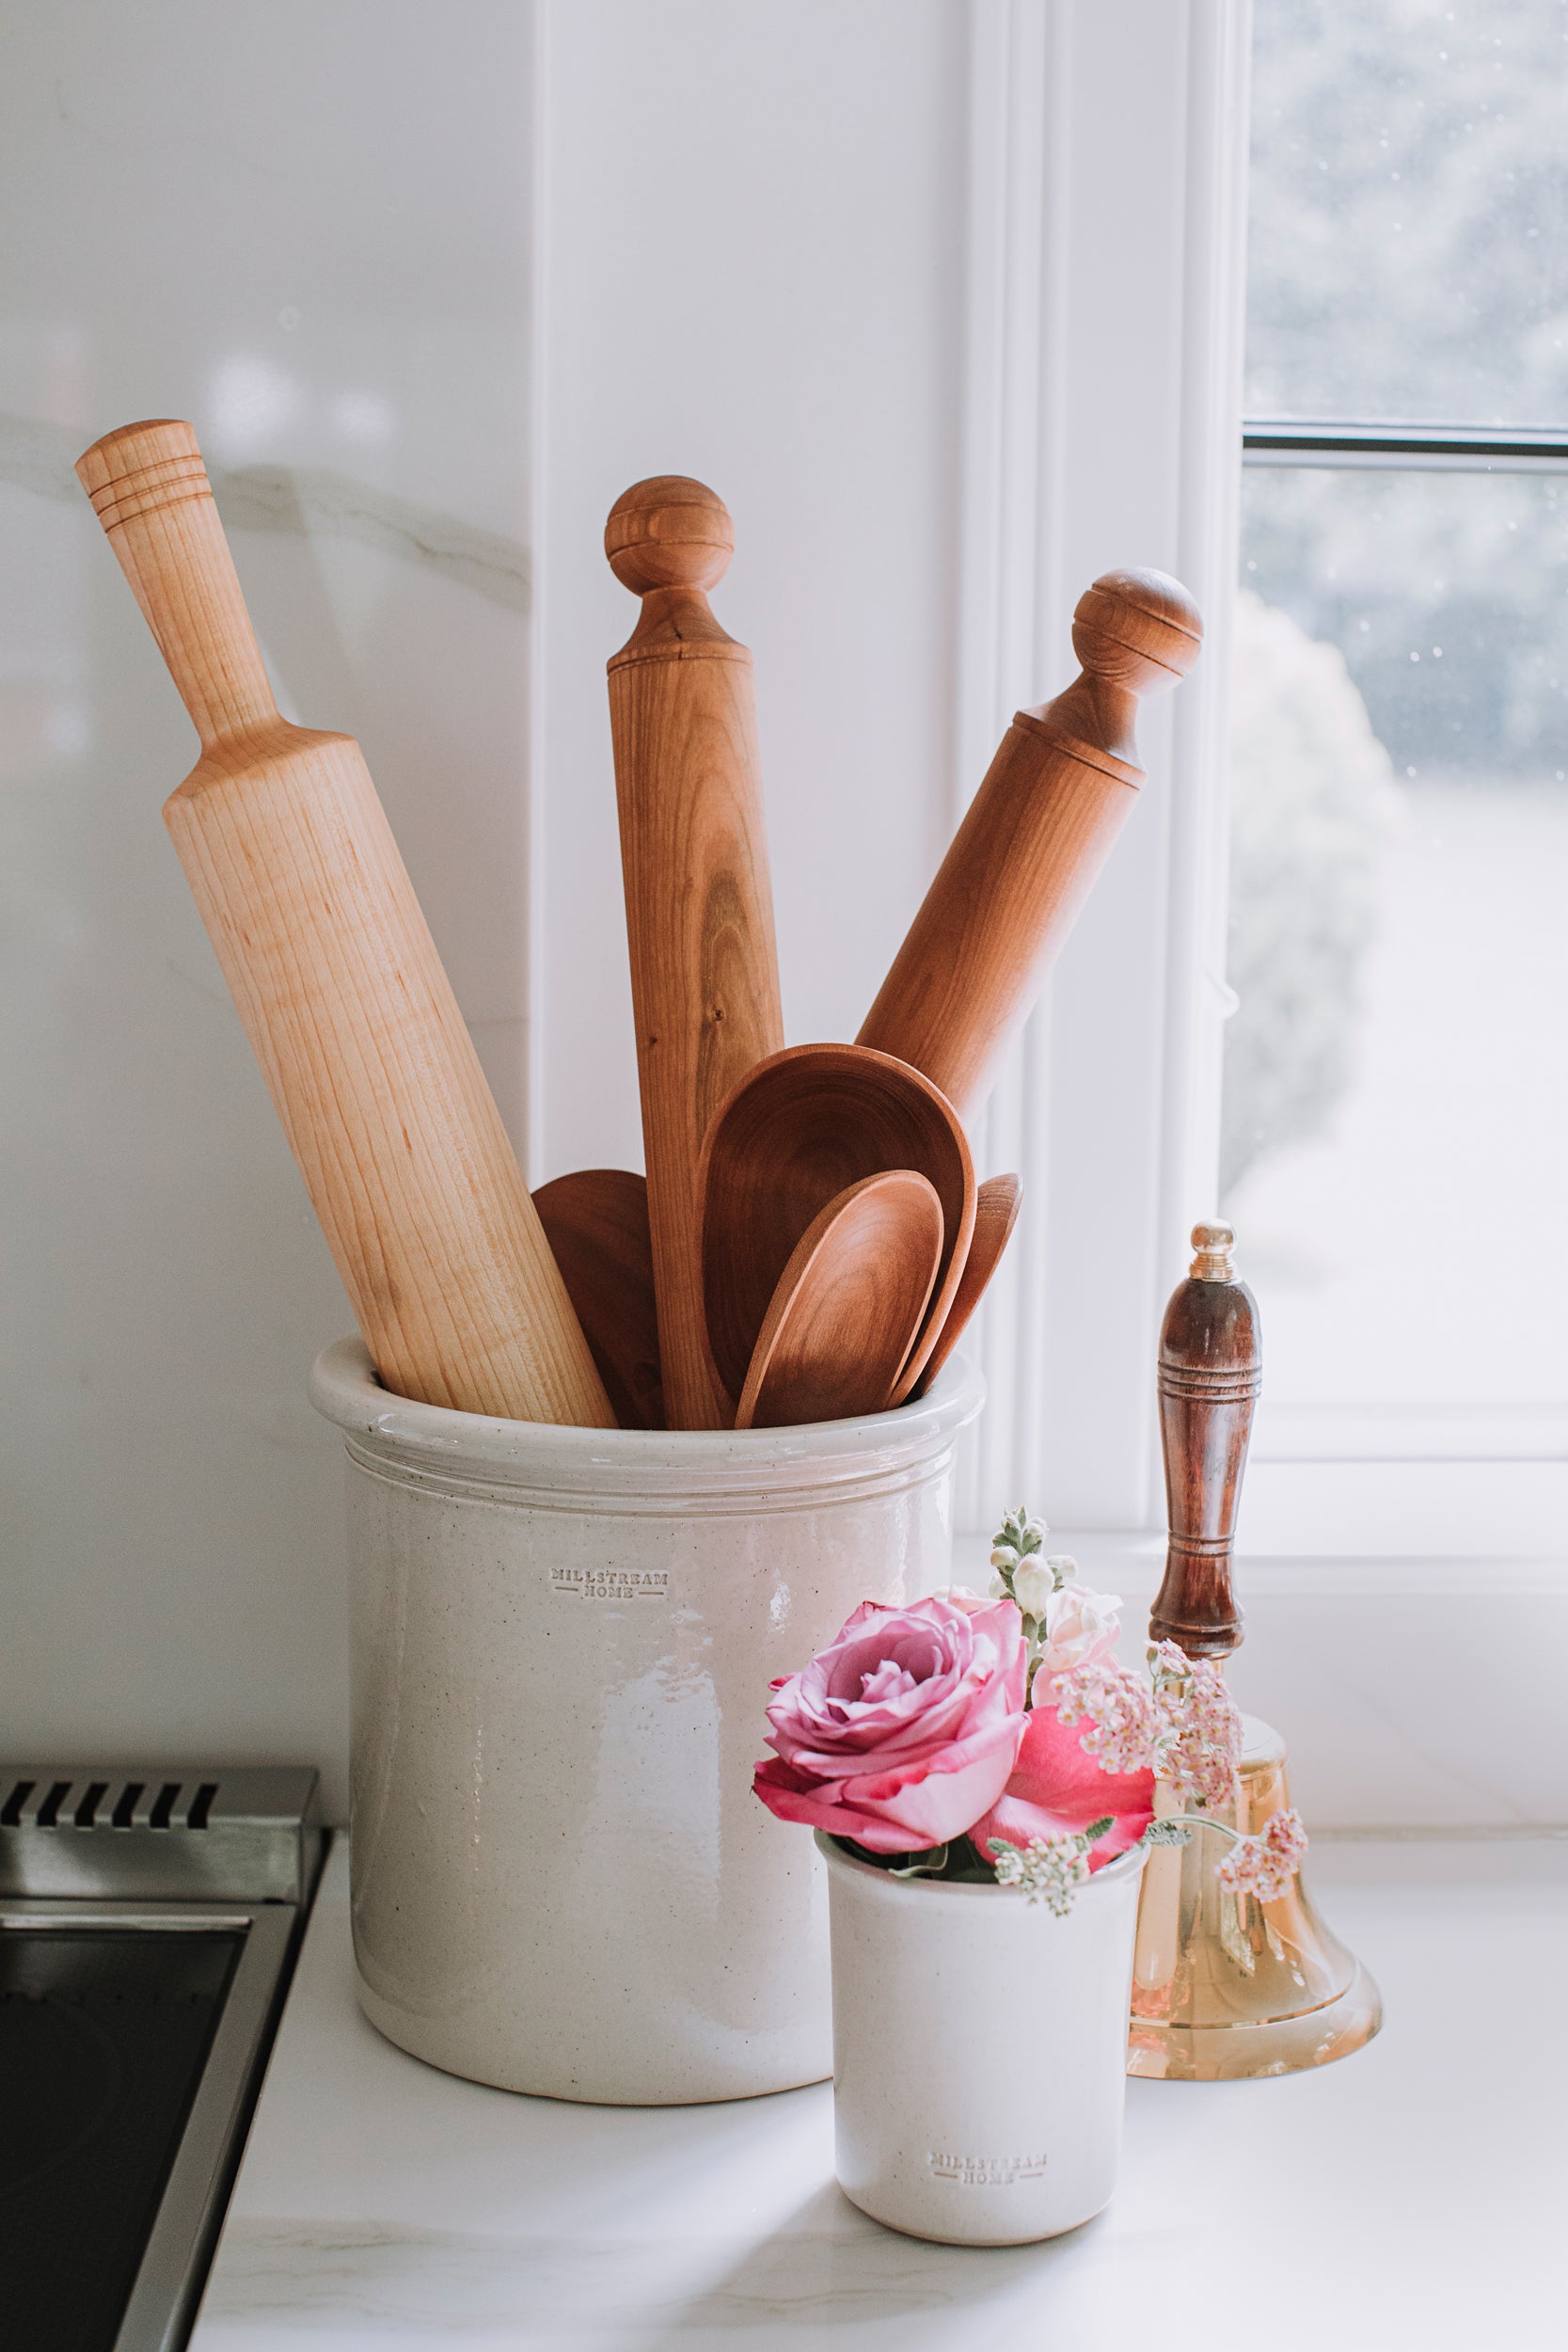 The Classic Rolling Pin in a Crock on a Countertop